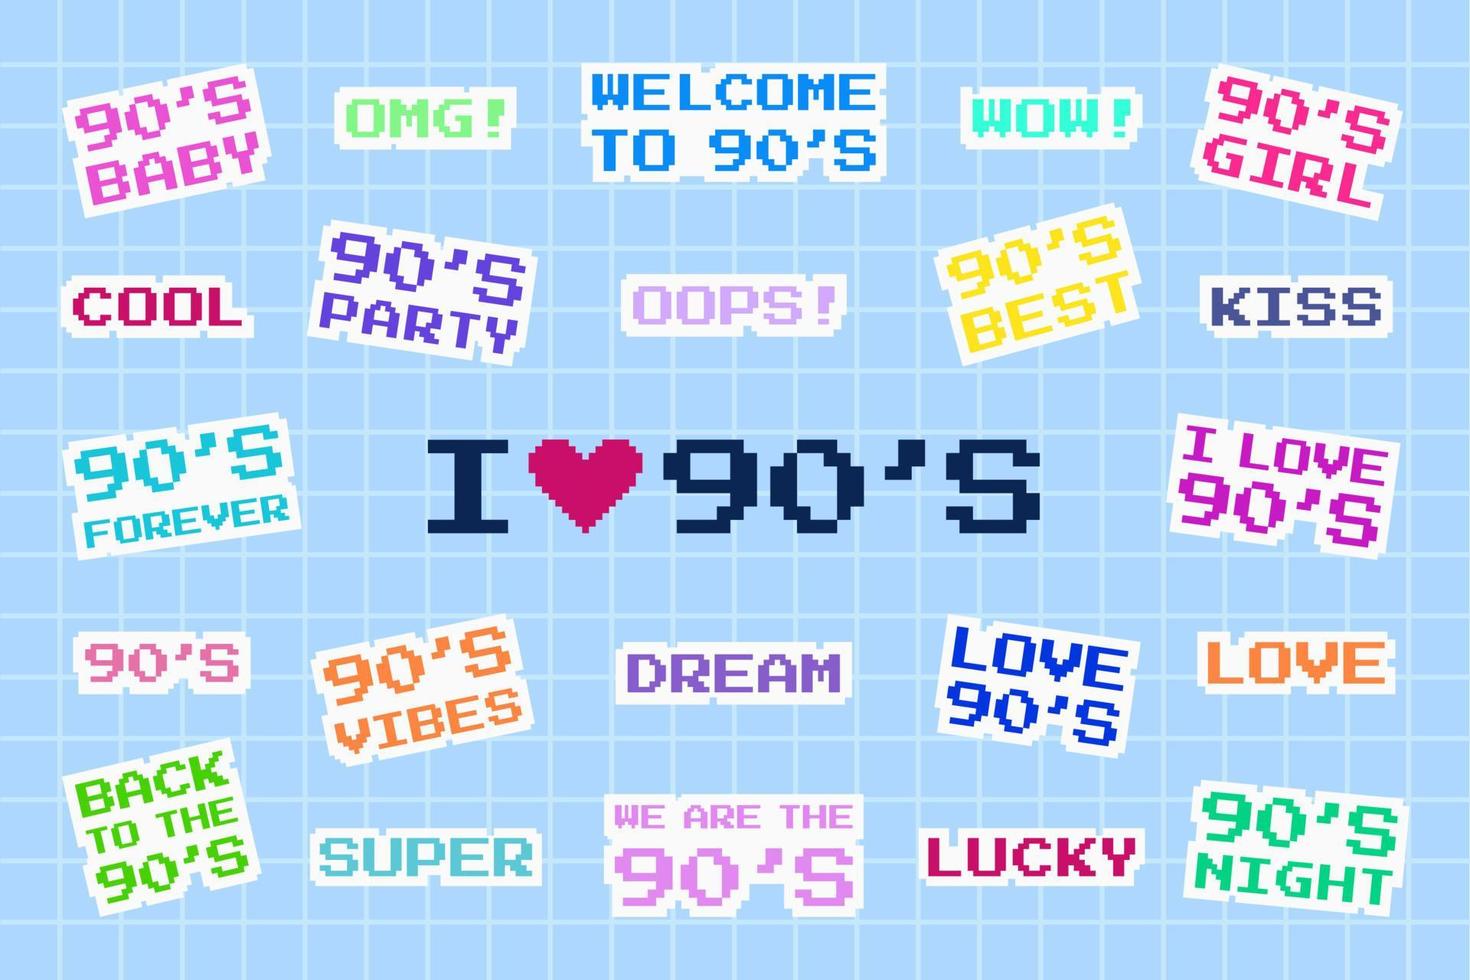 Sticker pack words in 90s style. Pixel art stickers with text. Vector illustration on blue cage background.